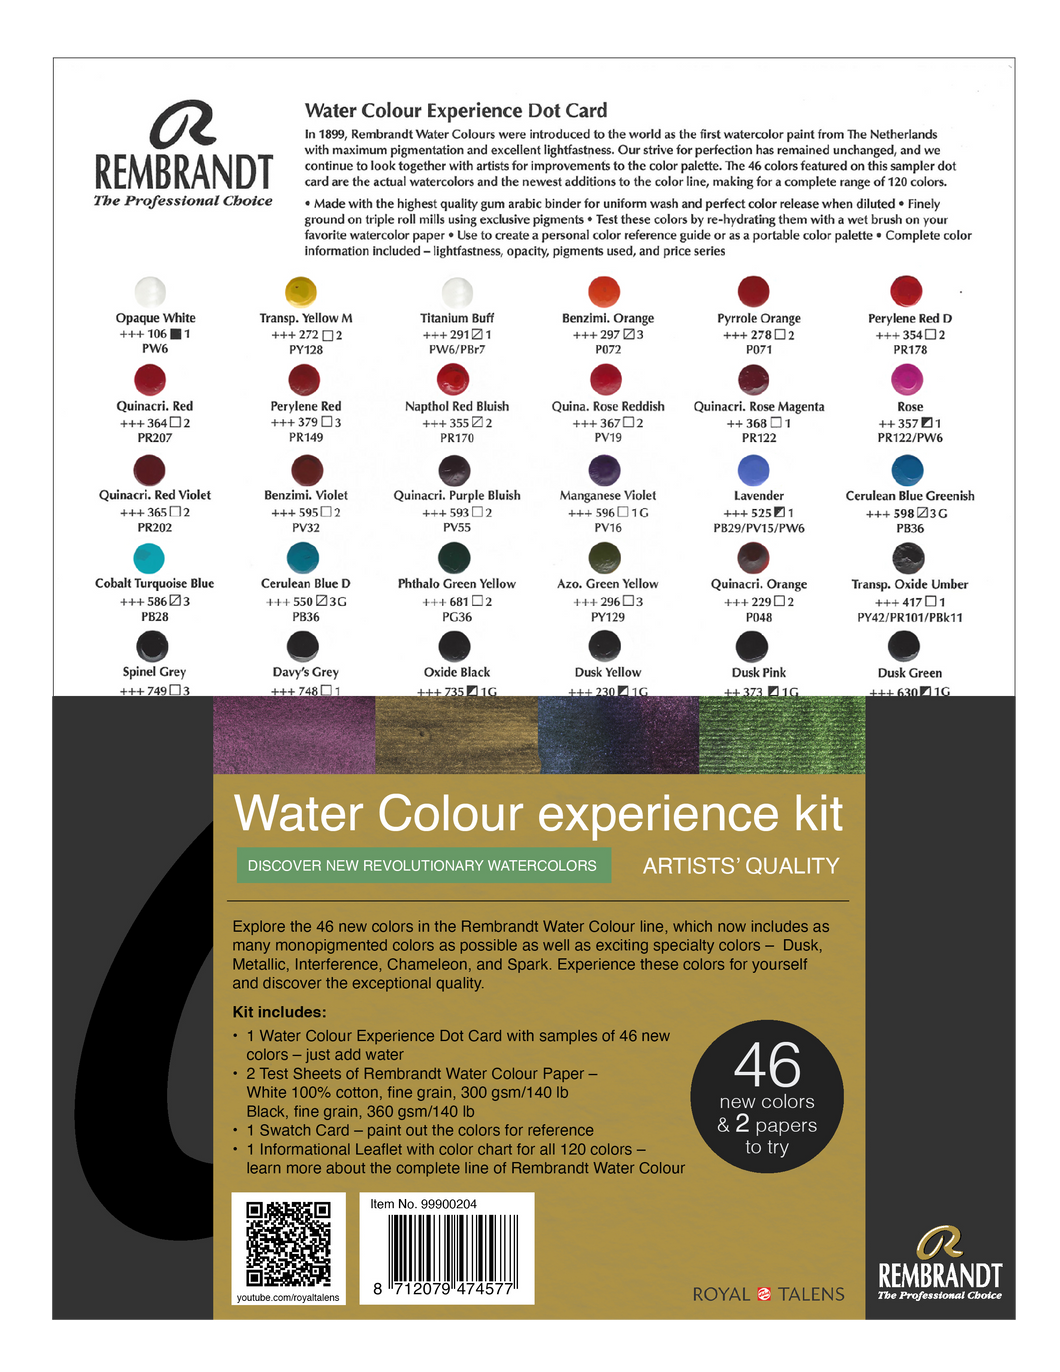 Rembrandt Watercolor Dot Card Experience Kit